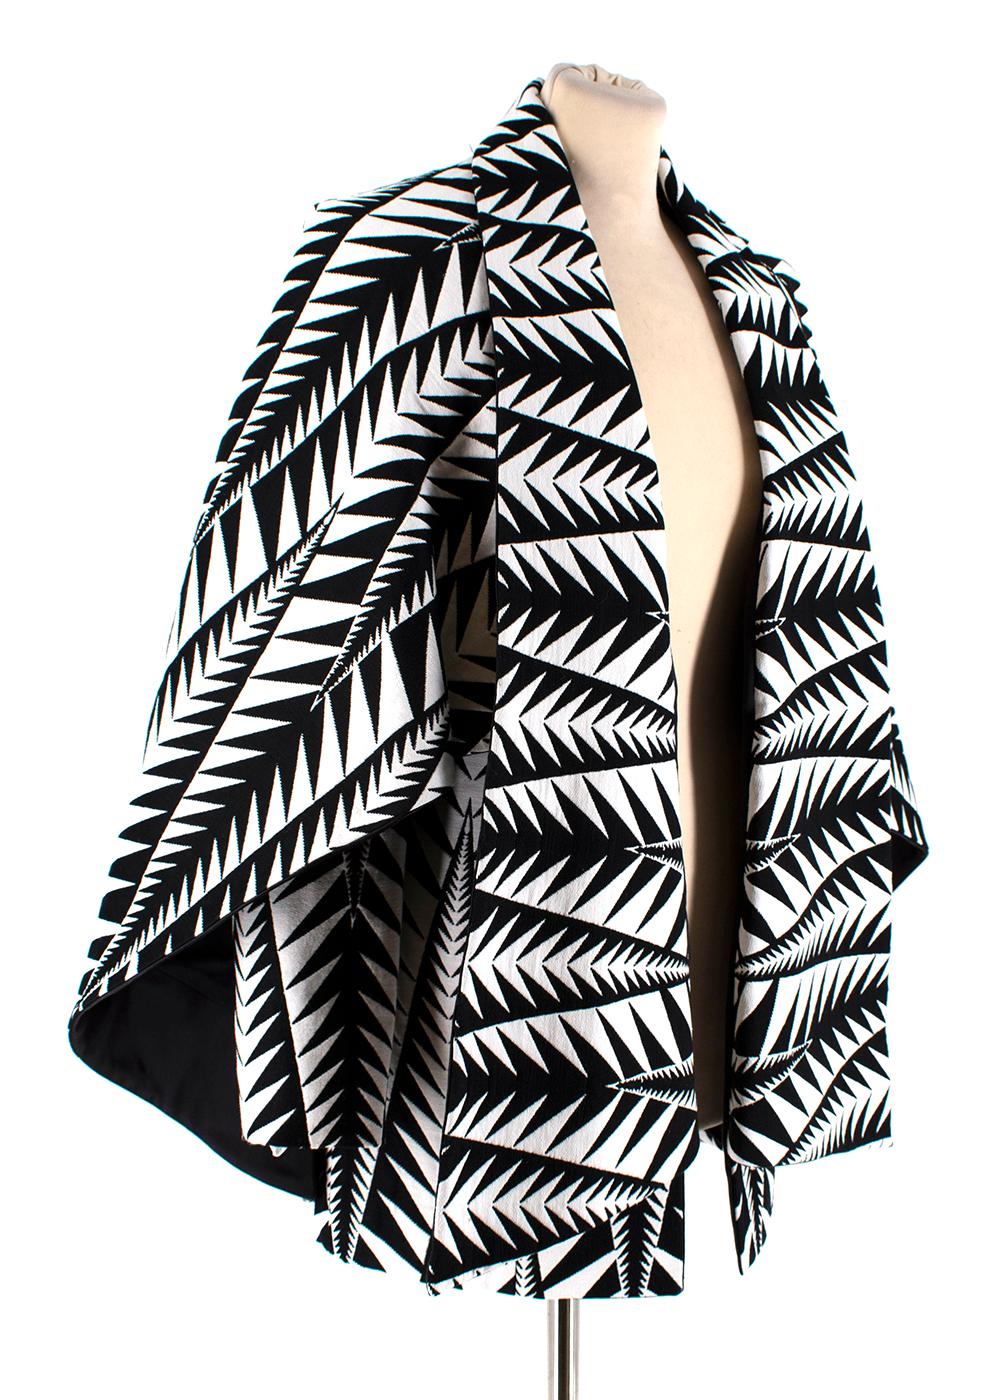 Balmain Black & White Jacquard Cape Coat  

-Elegant hybrid style for a glamorous winter day
-Luxurious jacquard pattern
-Unexpected inverted oversize lapel 
-Cave over the sleeves 
-2 concealed pockets to the front under the lapel 
-Fully lined